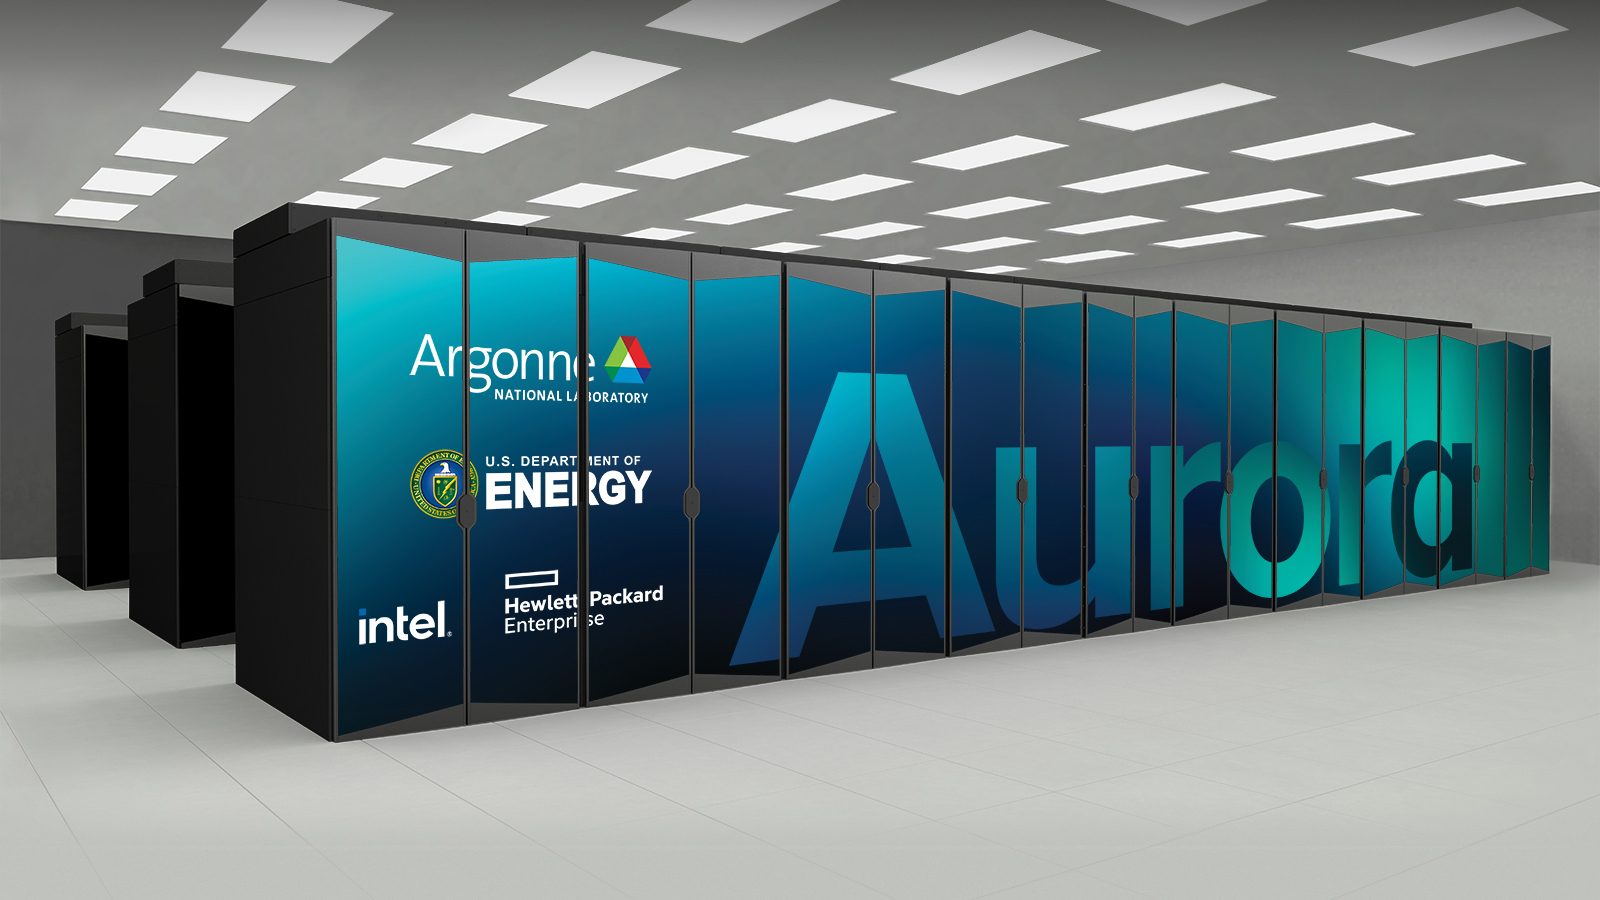 Rendering of the planned Aurora supercomputer, whose home will be the US Department of Energy's Argonne National Lab.